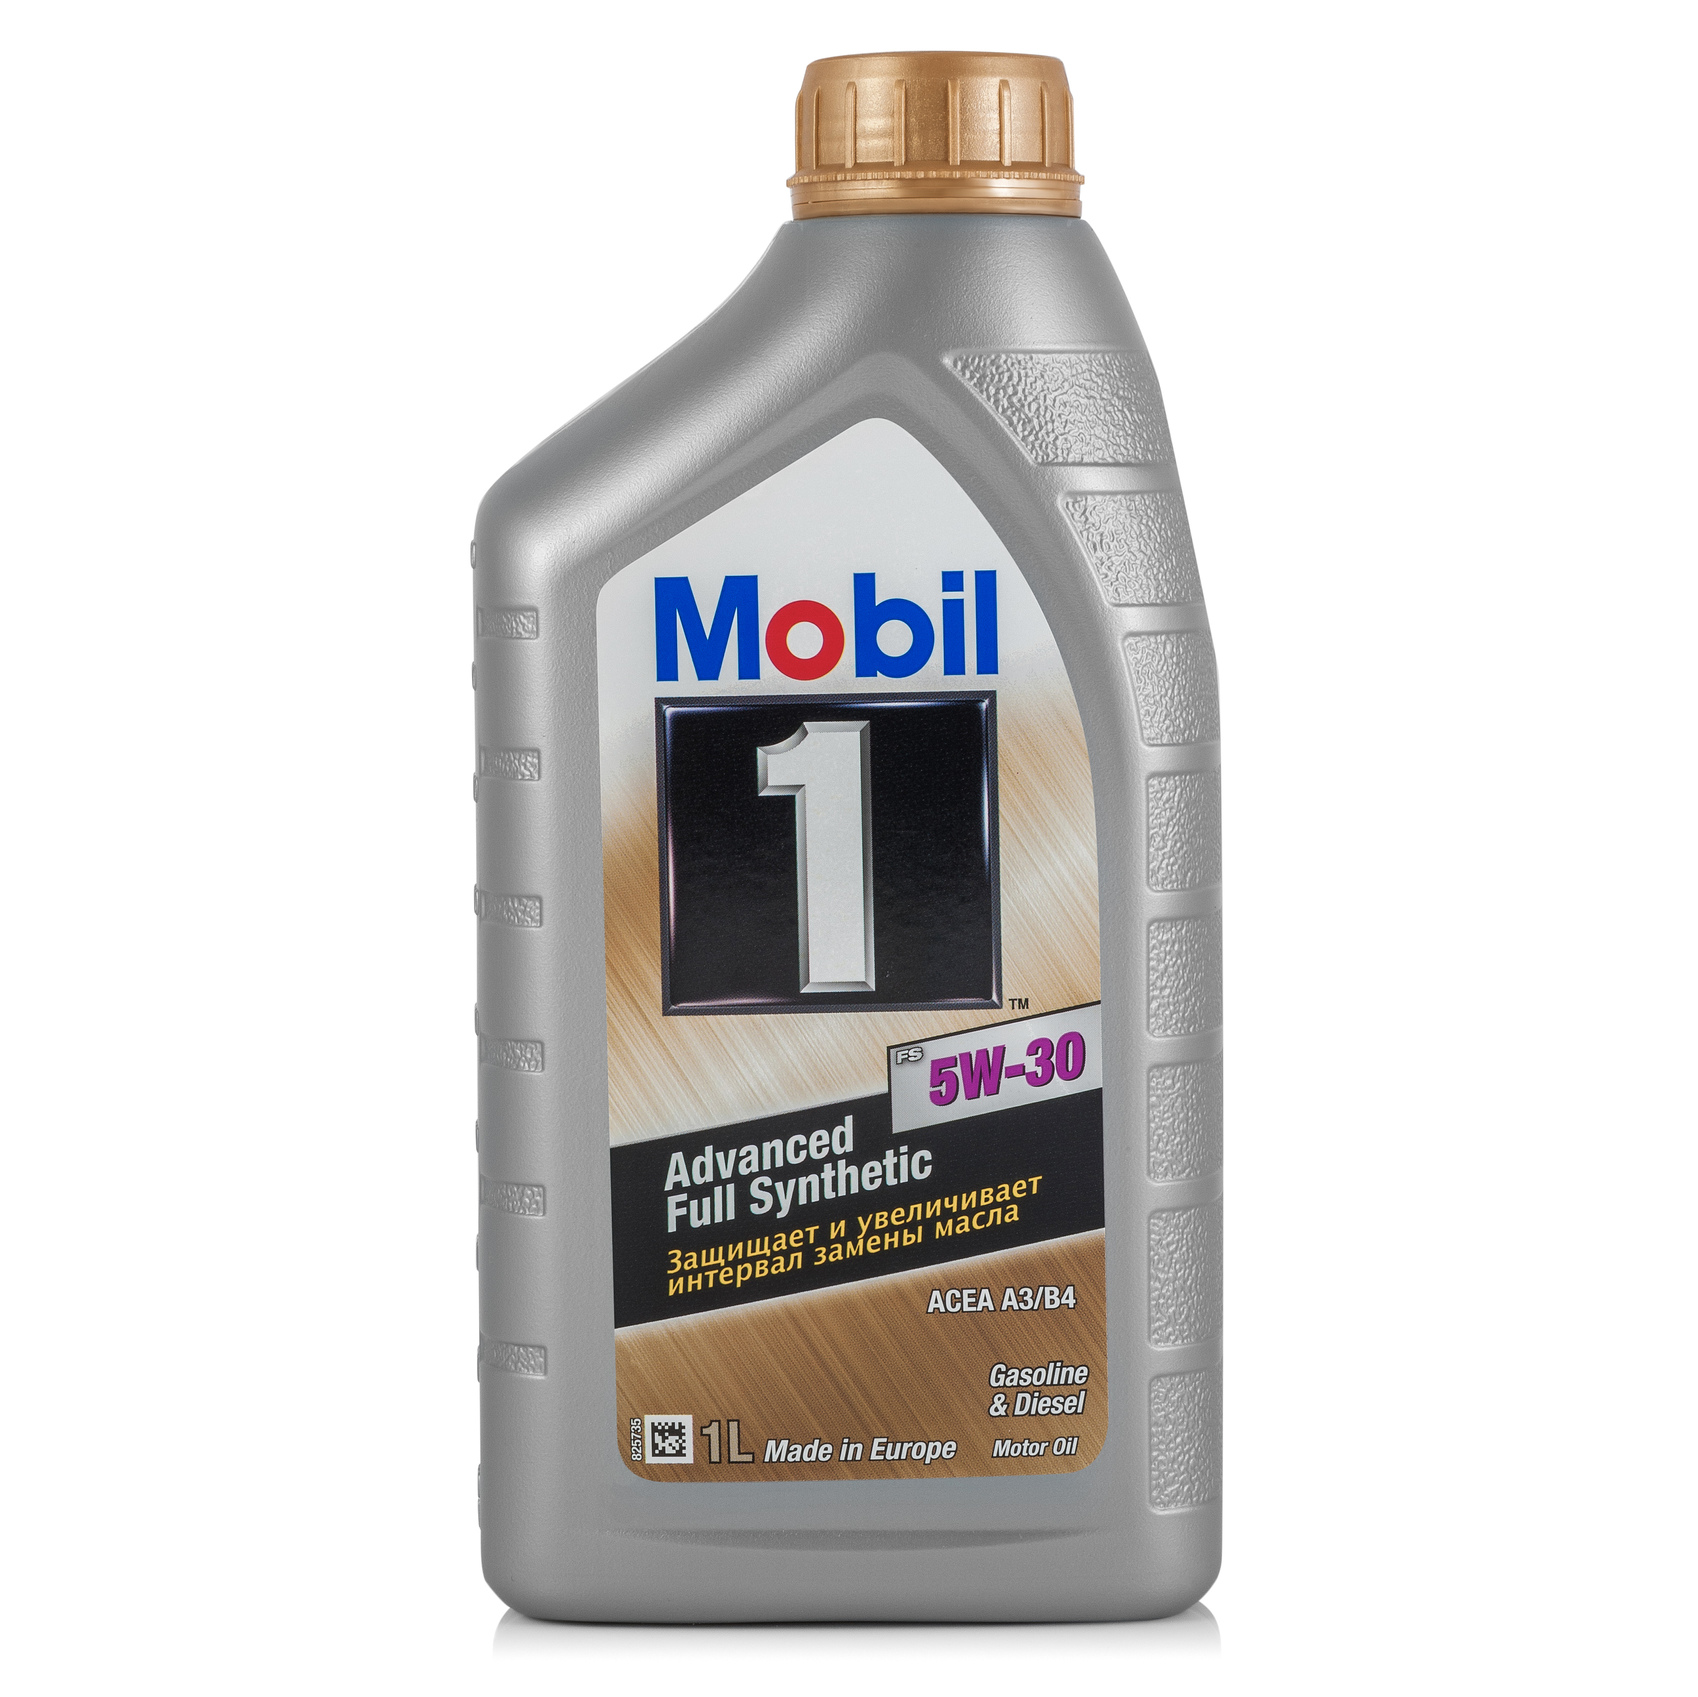 Mobil 153749 Engine oil Mobil 1 Full Synthetic 5W-30, 1L 153749